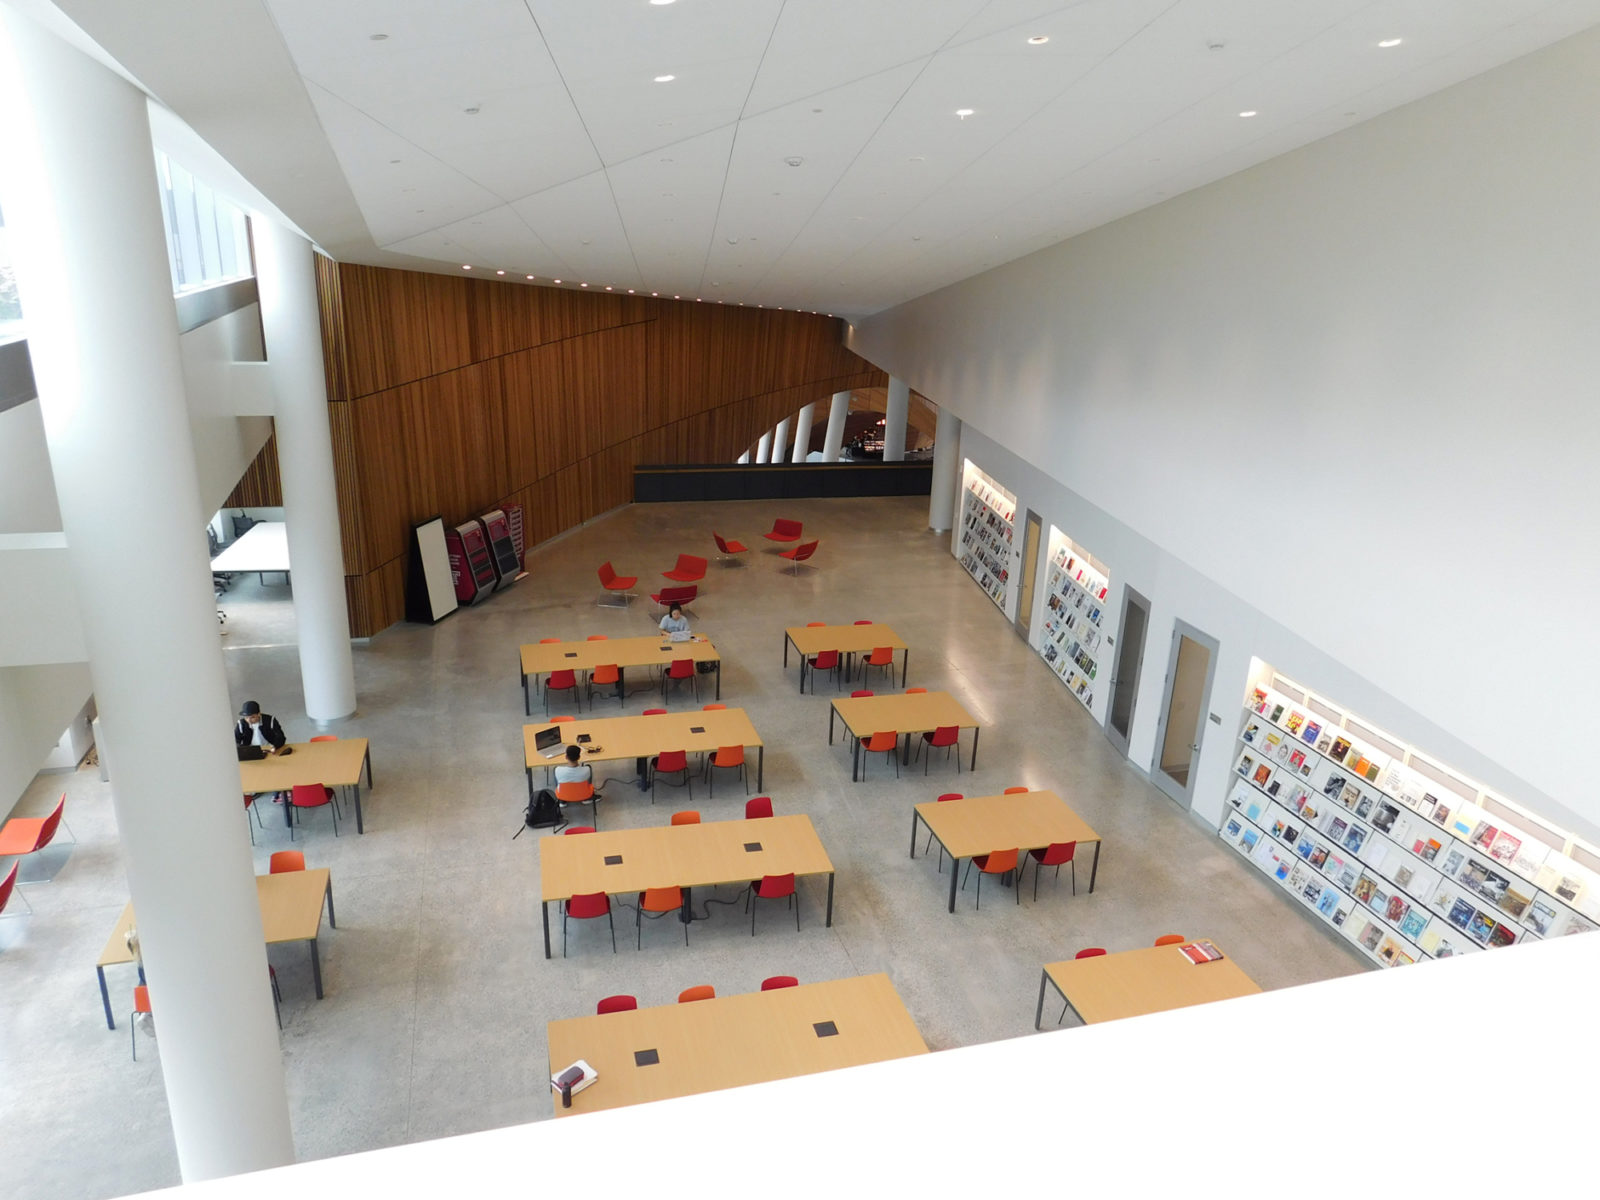 View of open area from above. There are several tables and chairs set up in the space and there is a wall of books on the right side.